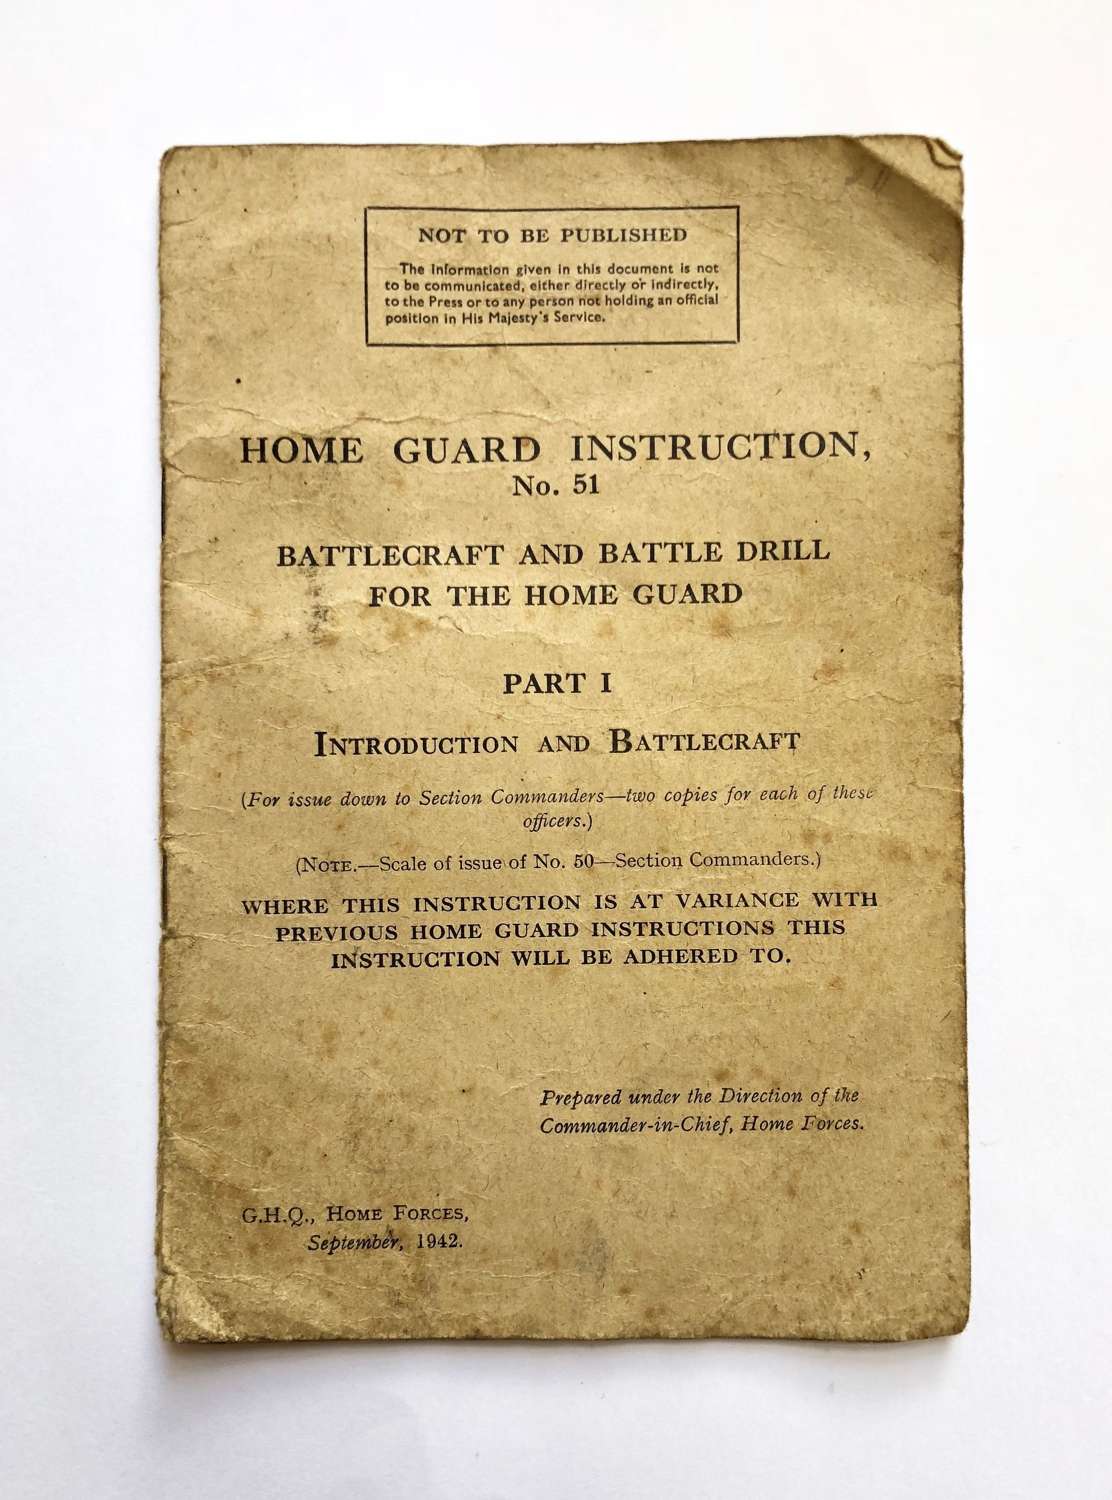 WW2 Home Front Home Guard Instruction 51 Manual Pt 1